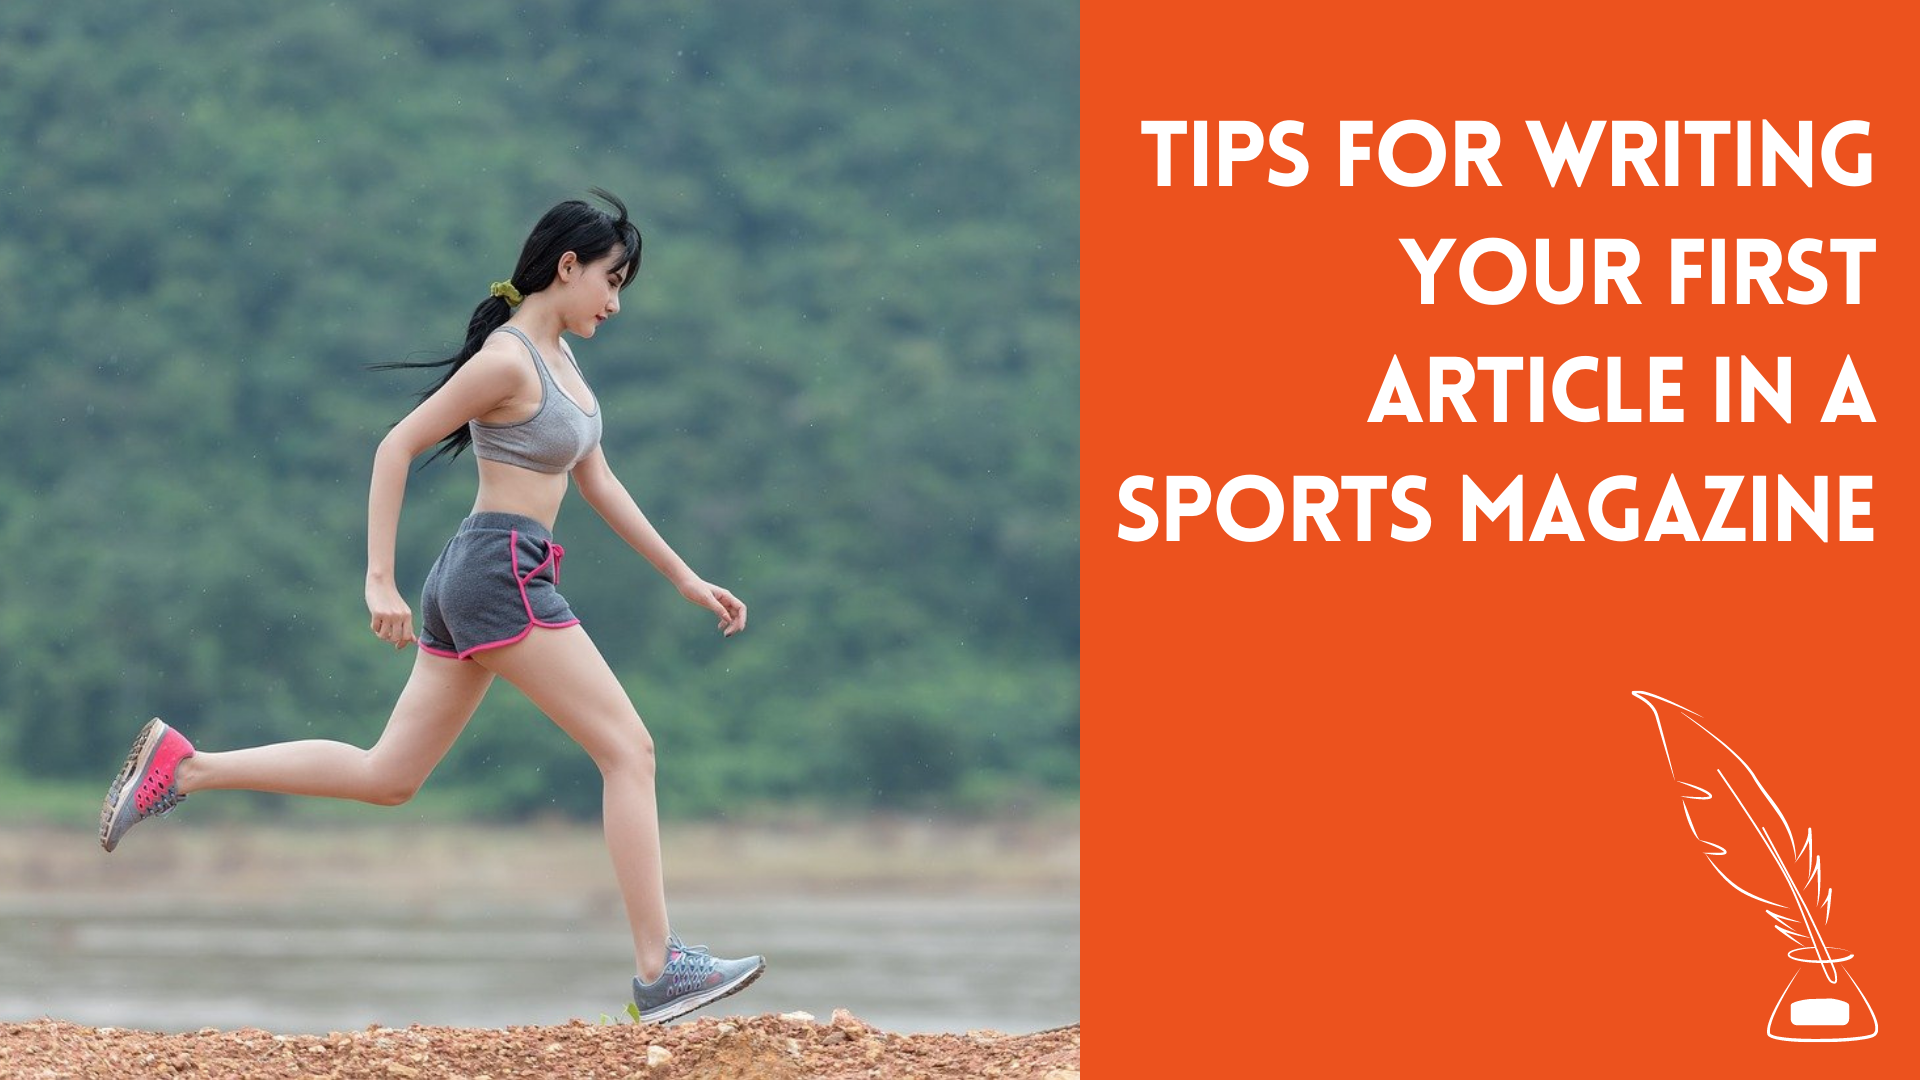 7 Tips for writing your first article in a sports magazine